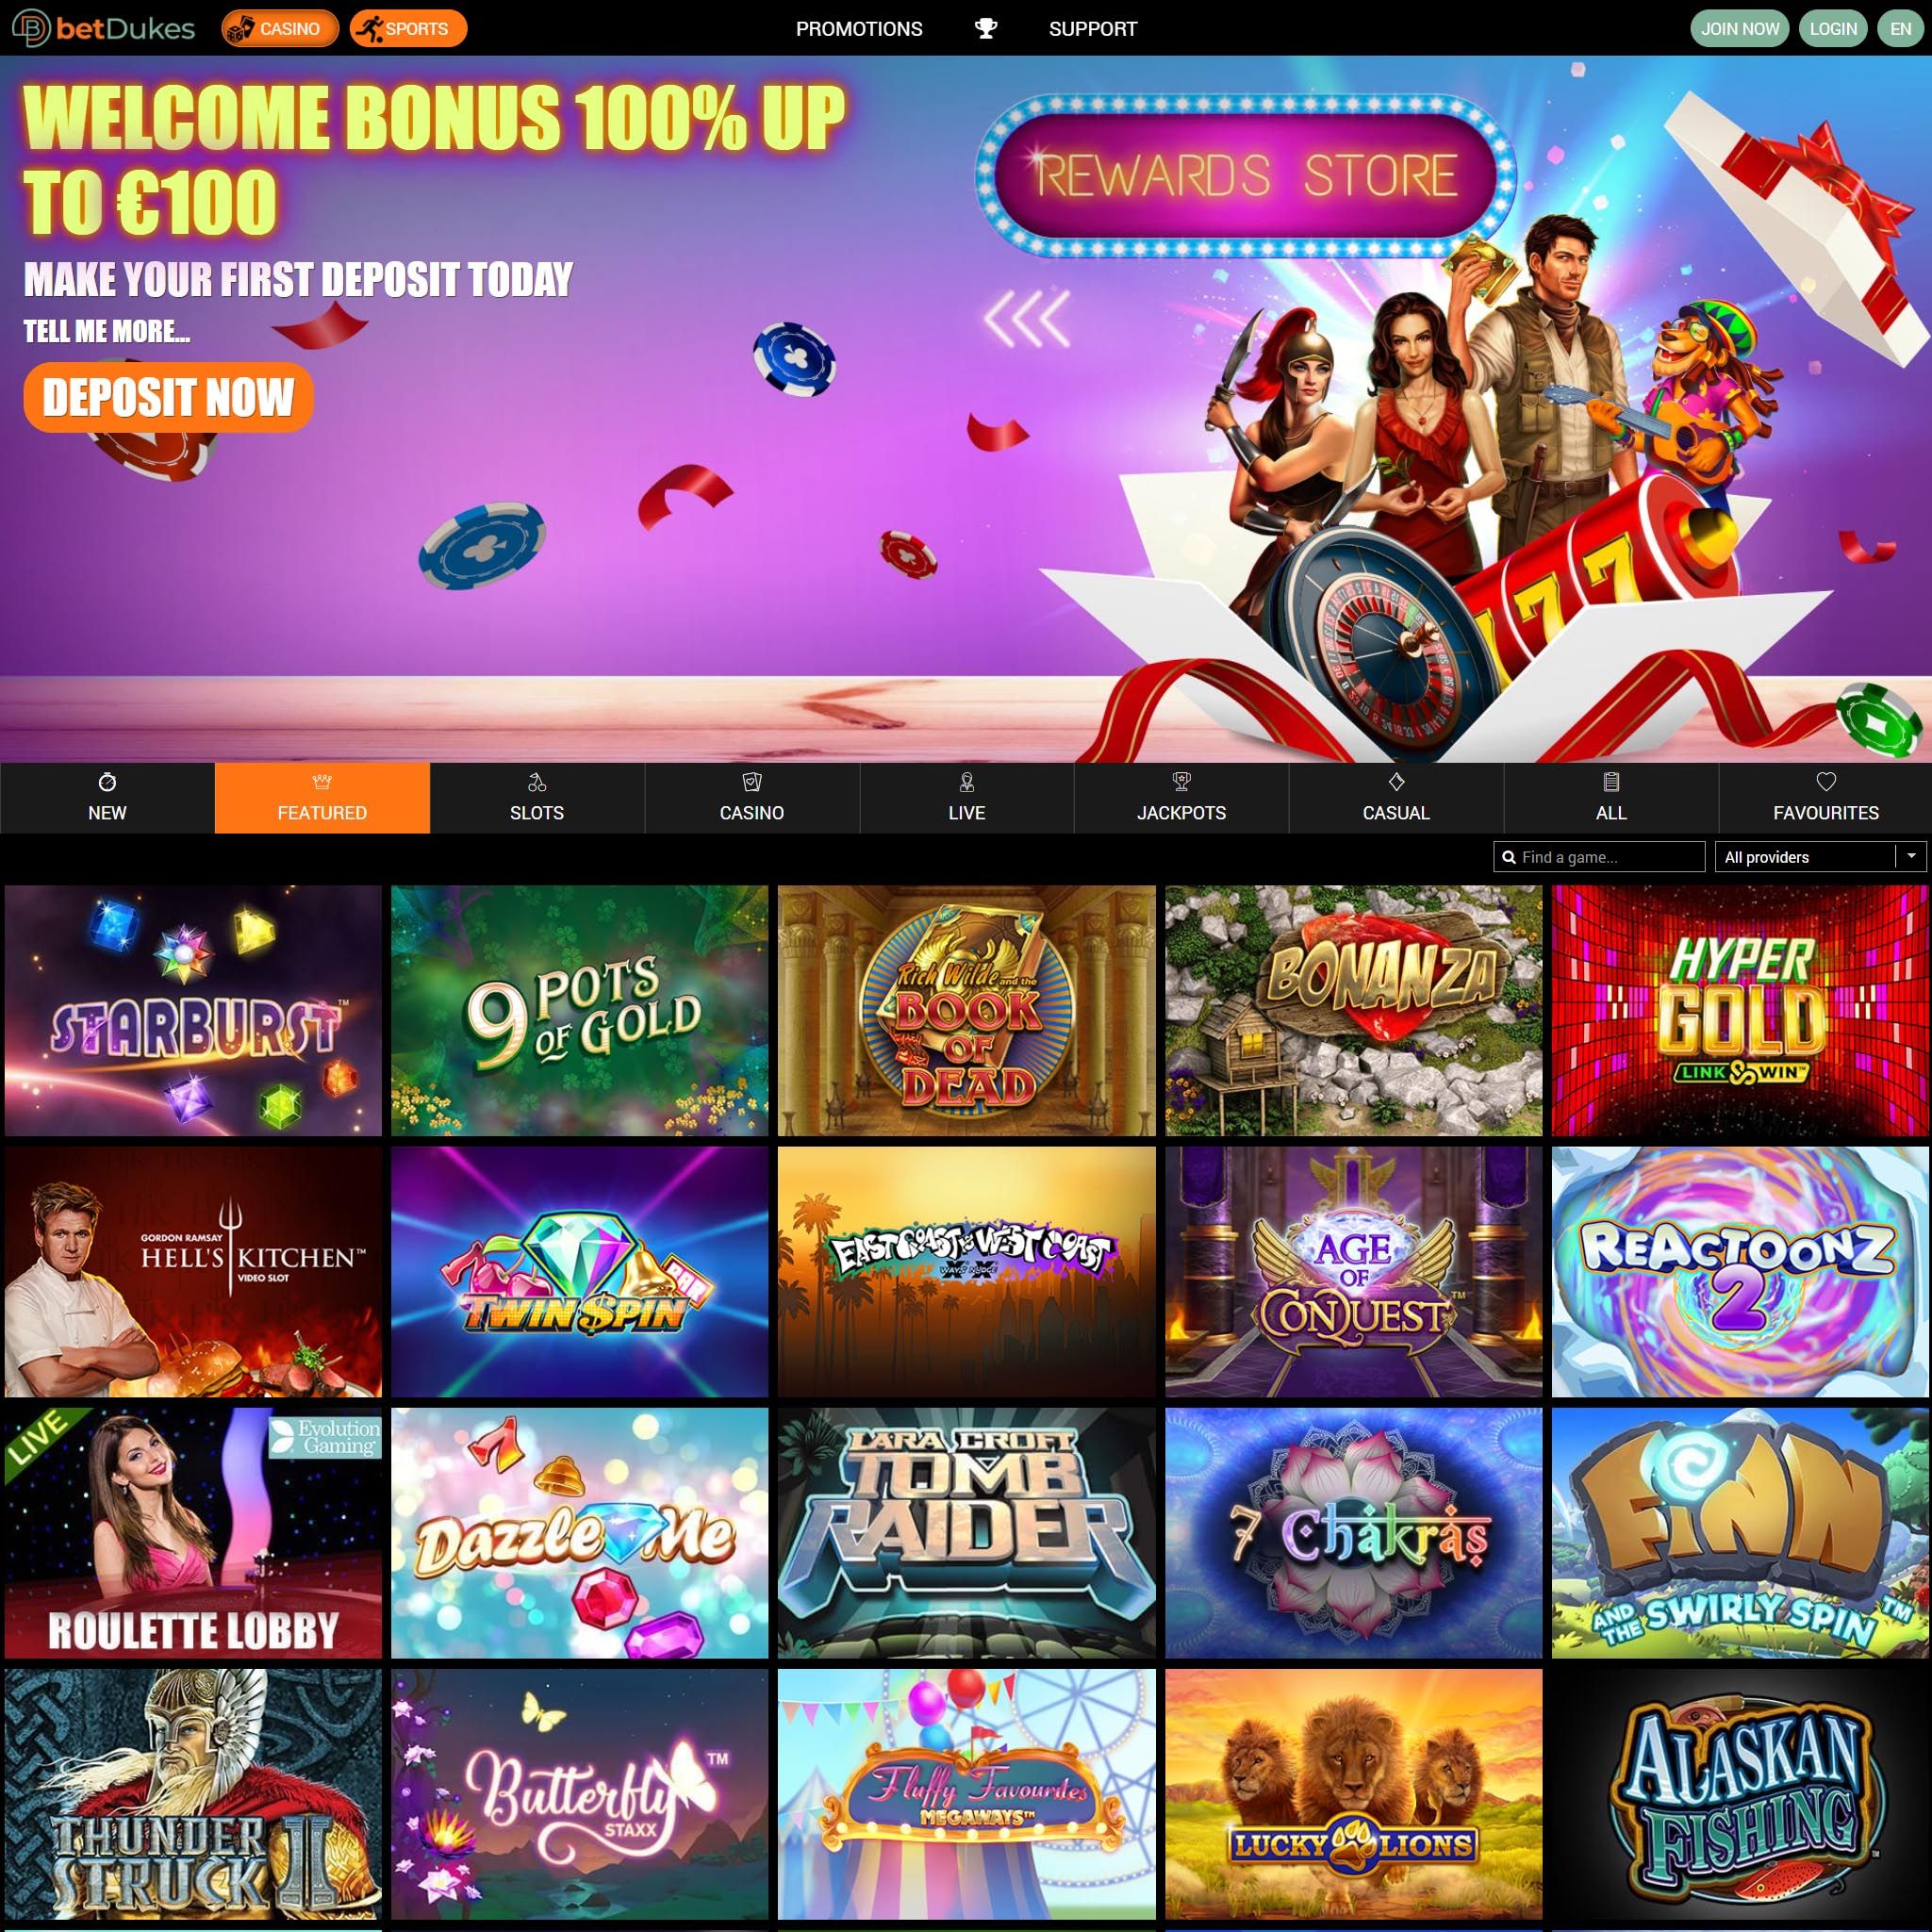 Dukes Casino review by Mr. Gamble